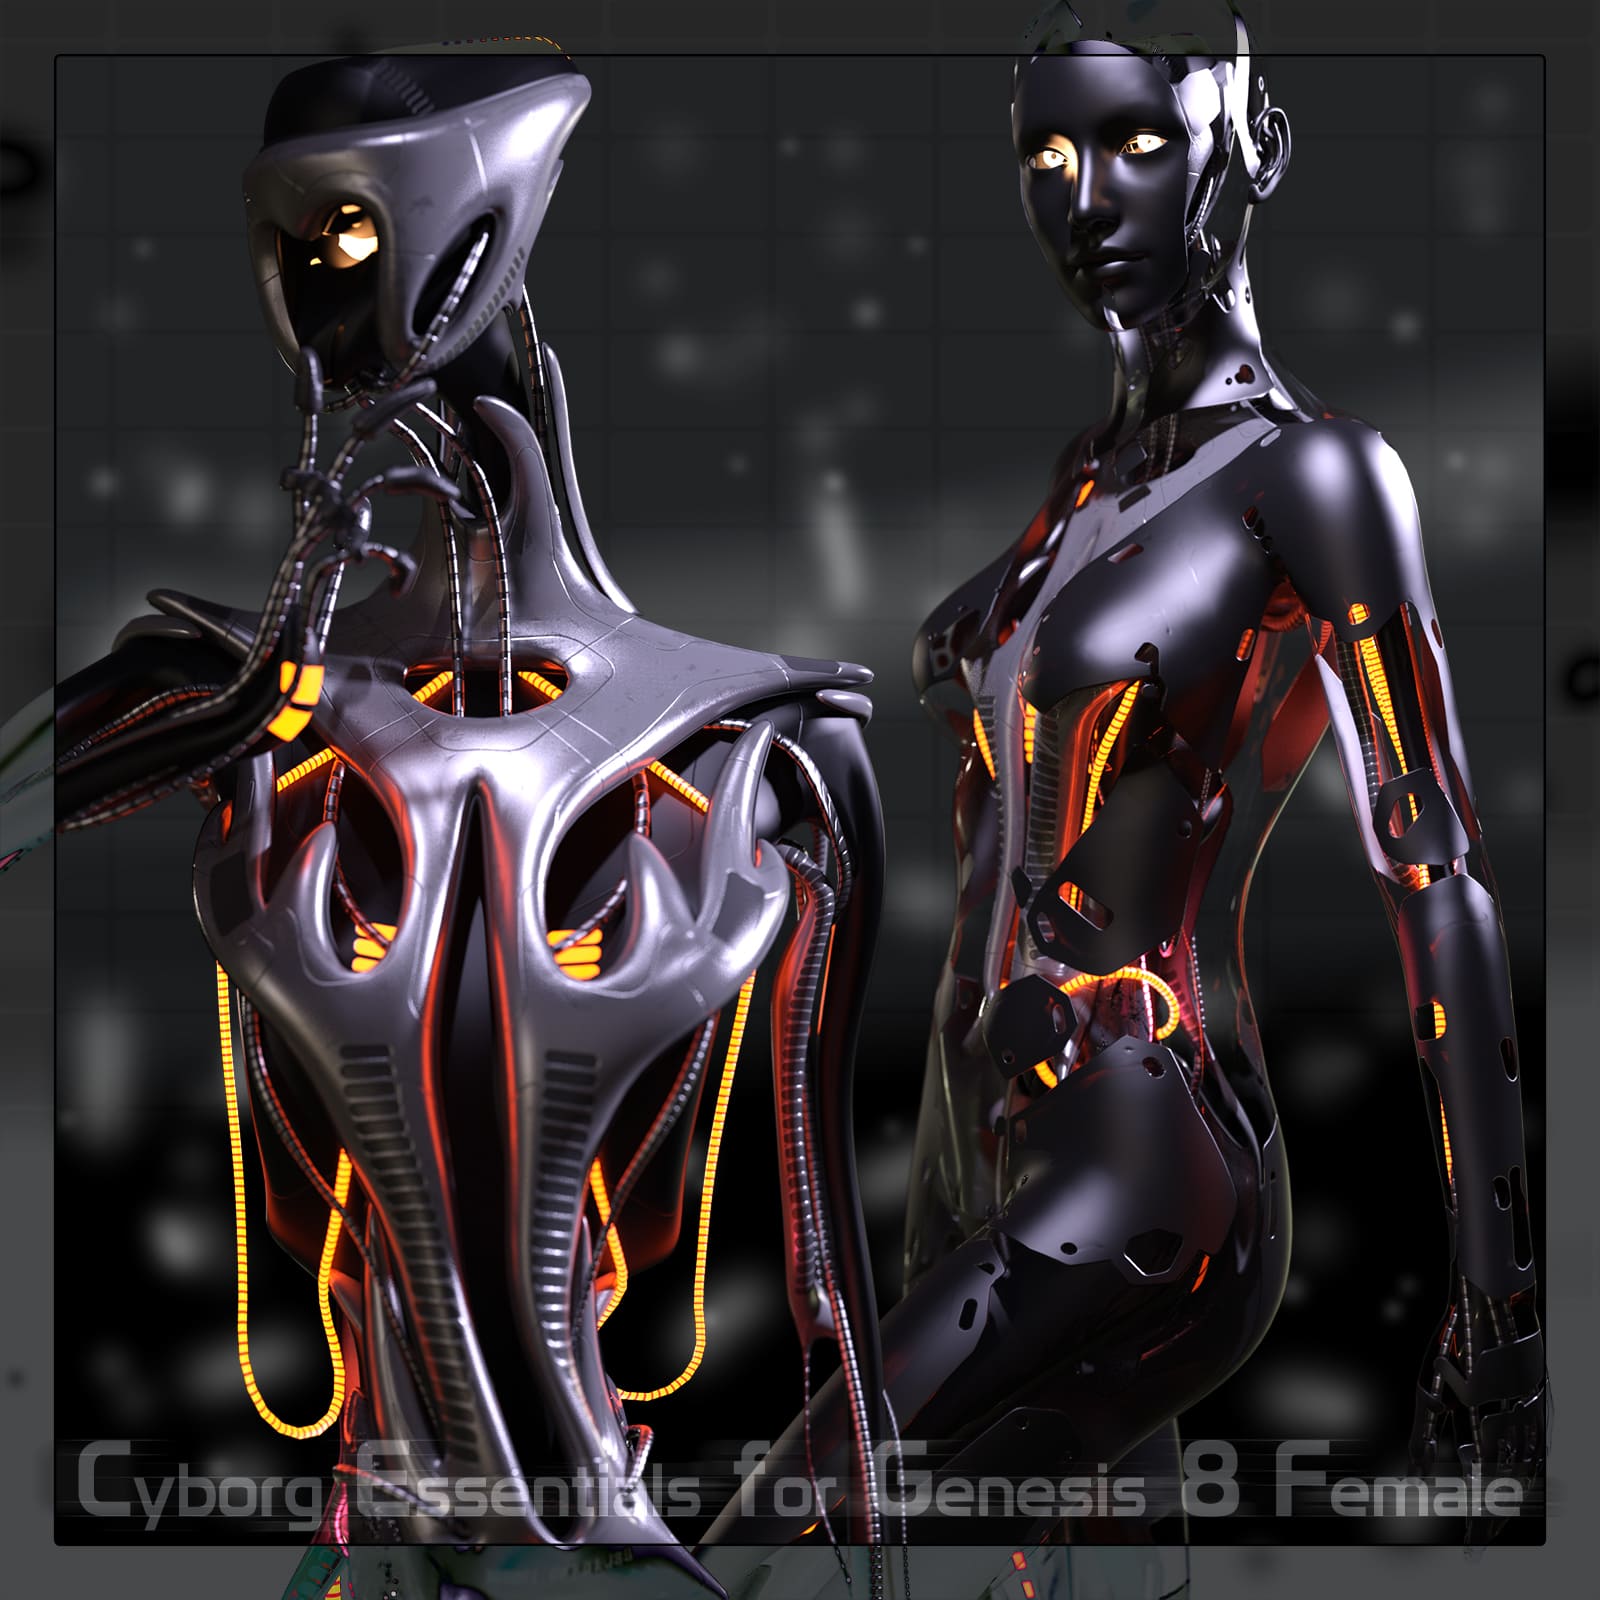 CyBody - Cyborg Internal Structure and Materials for Genesis 8 Female_DAZ3D下载站